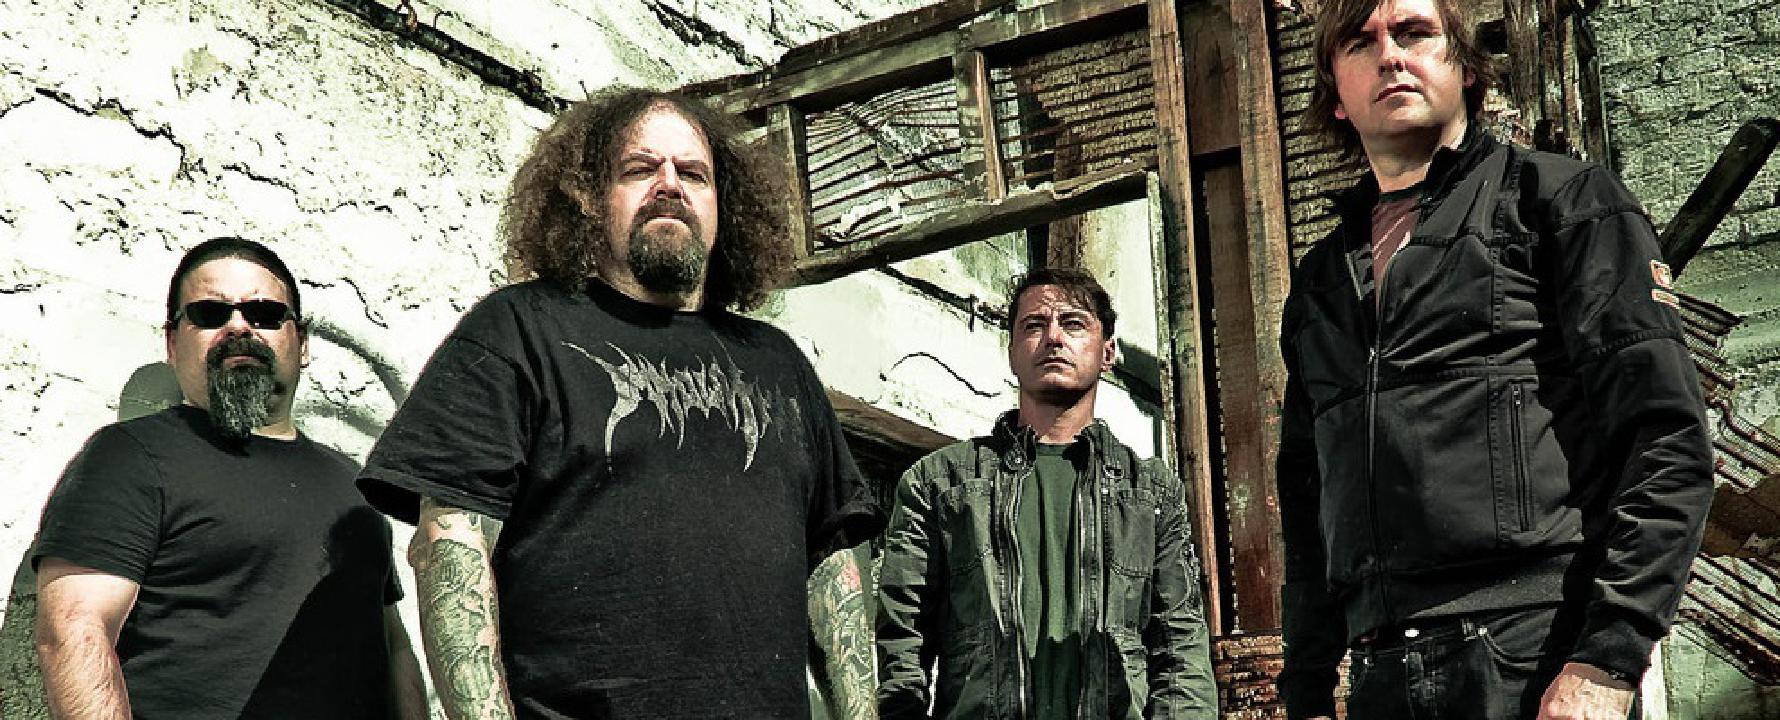 Promotional photograph of Napalm Death.